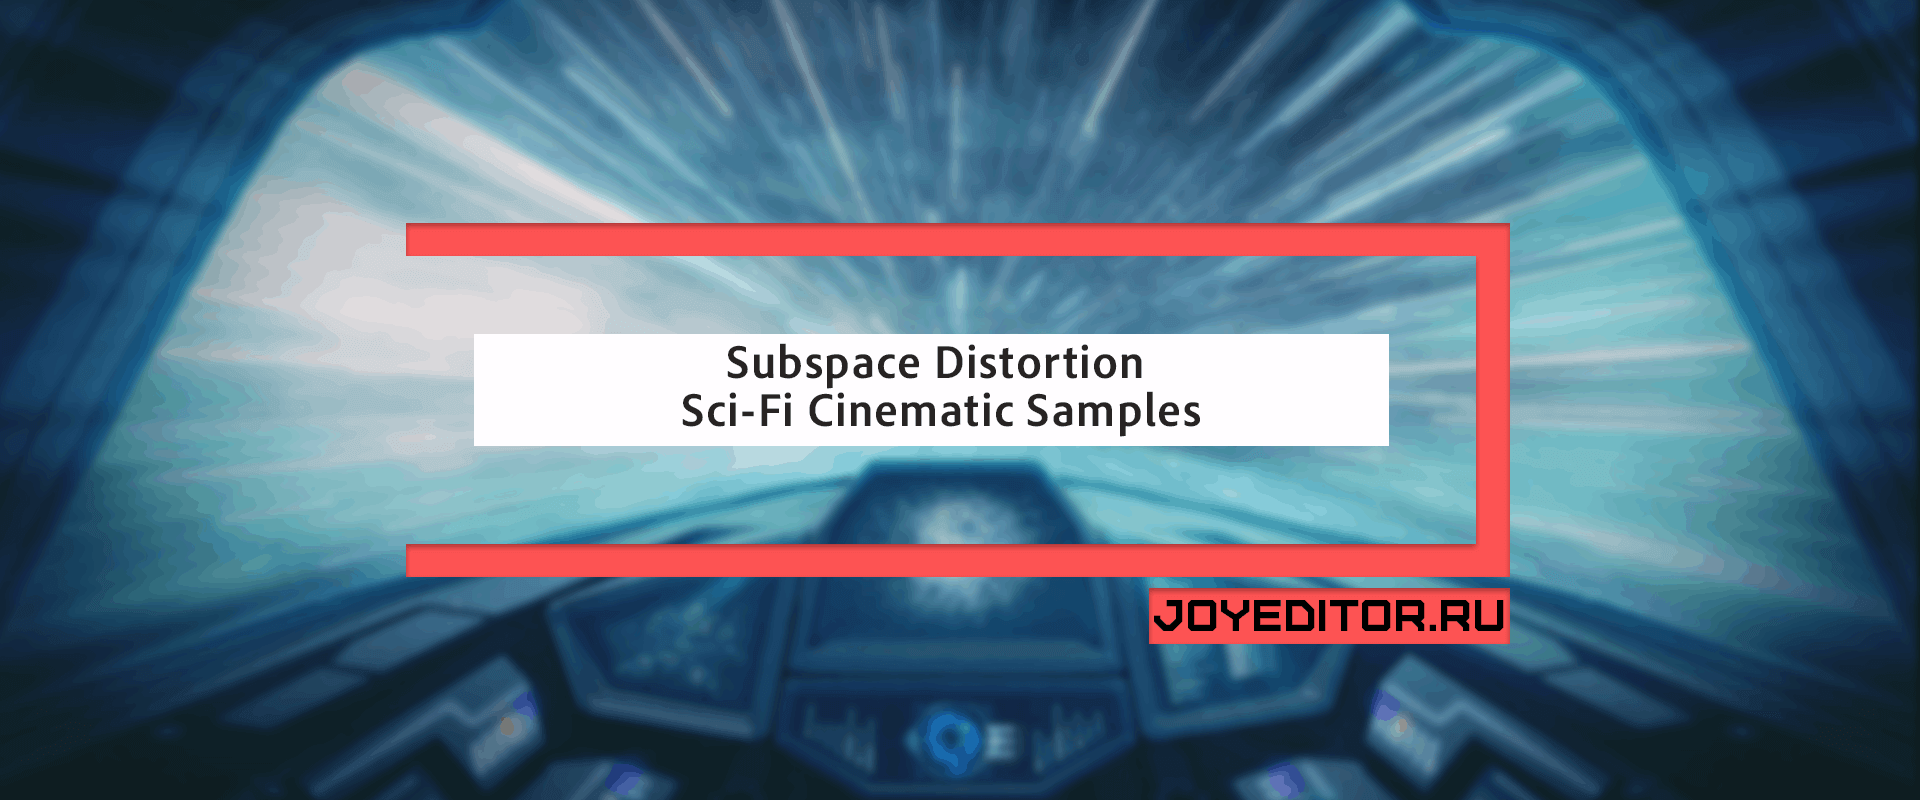 Subspace Distortion - Sci-Fi Cinematic Samples